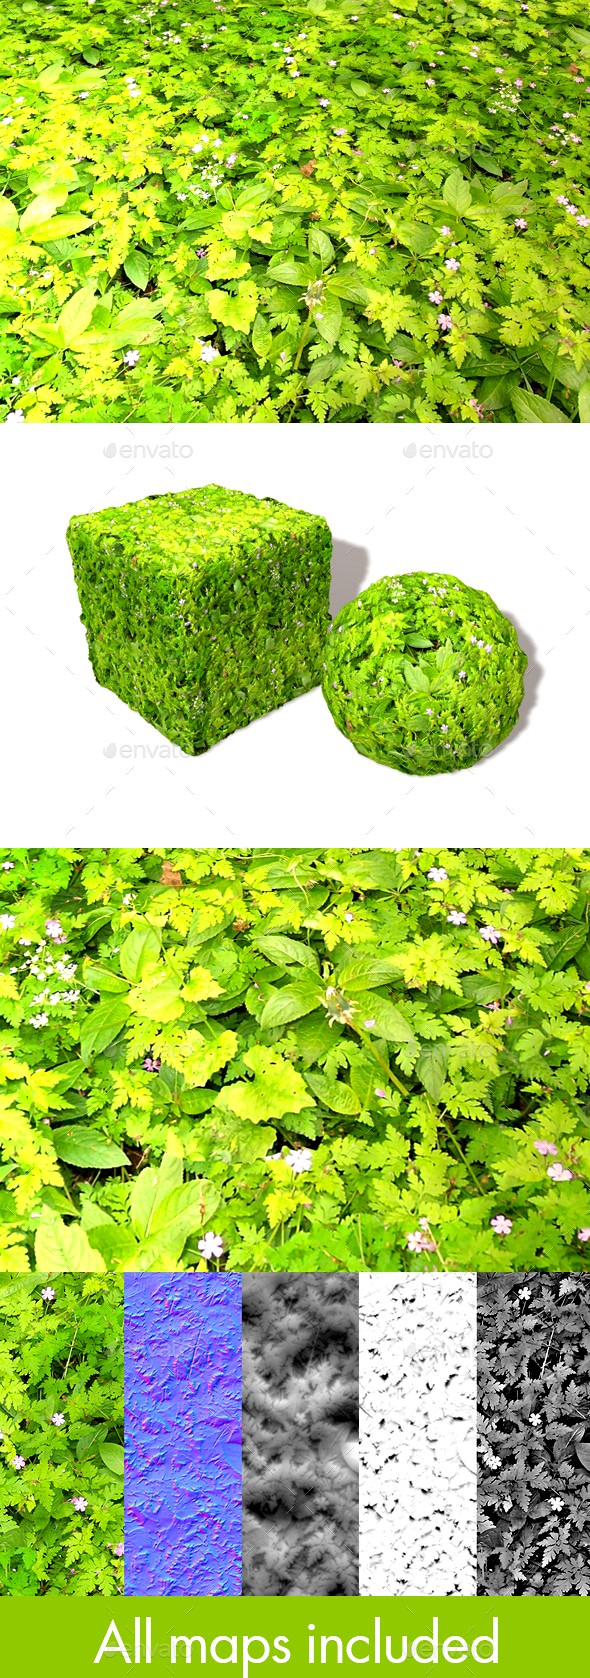 Ground Covering Plants Seamless Texture